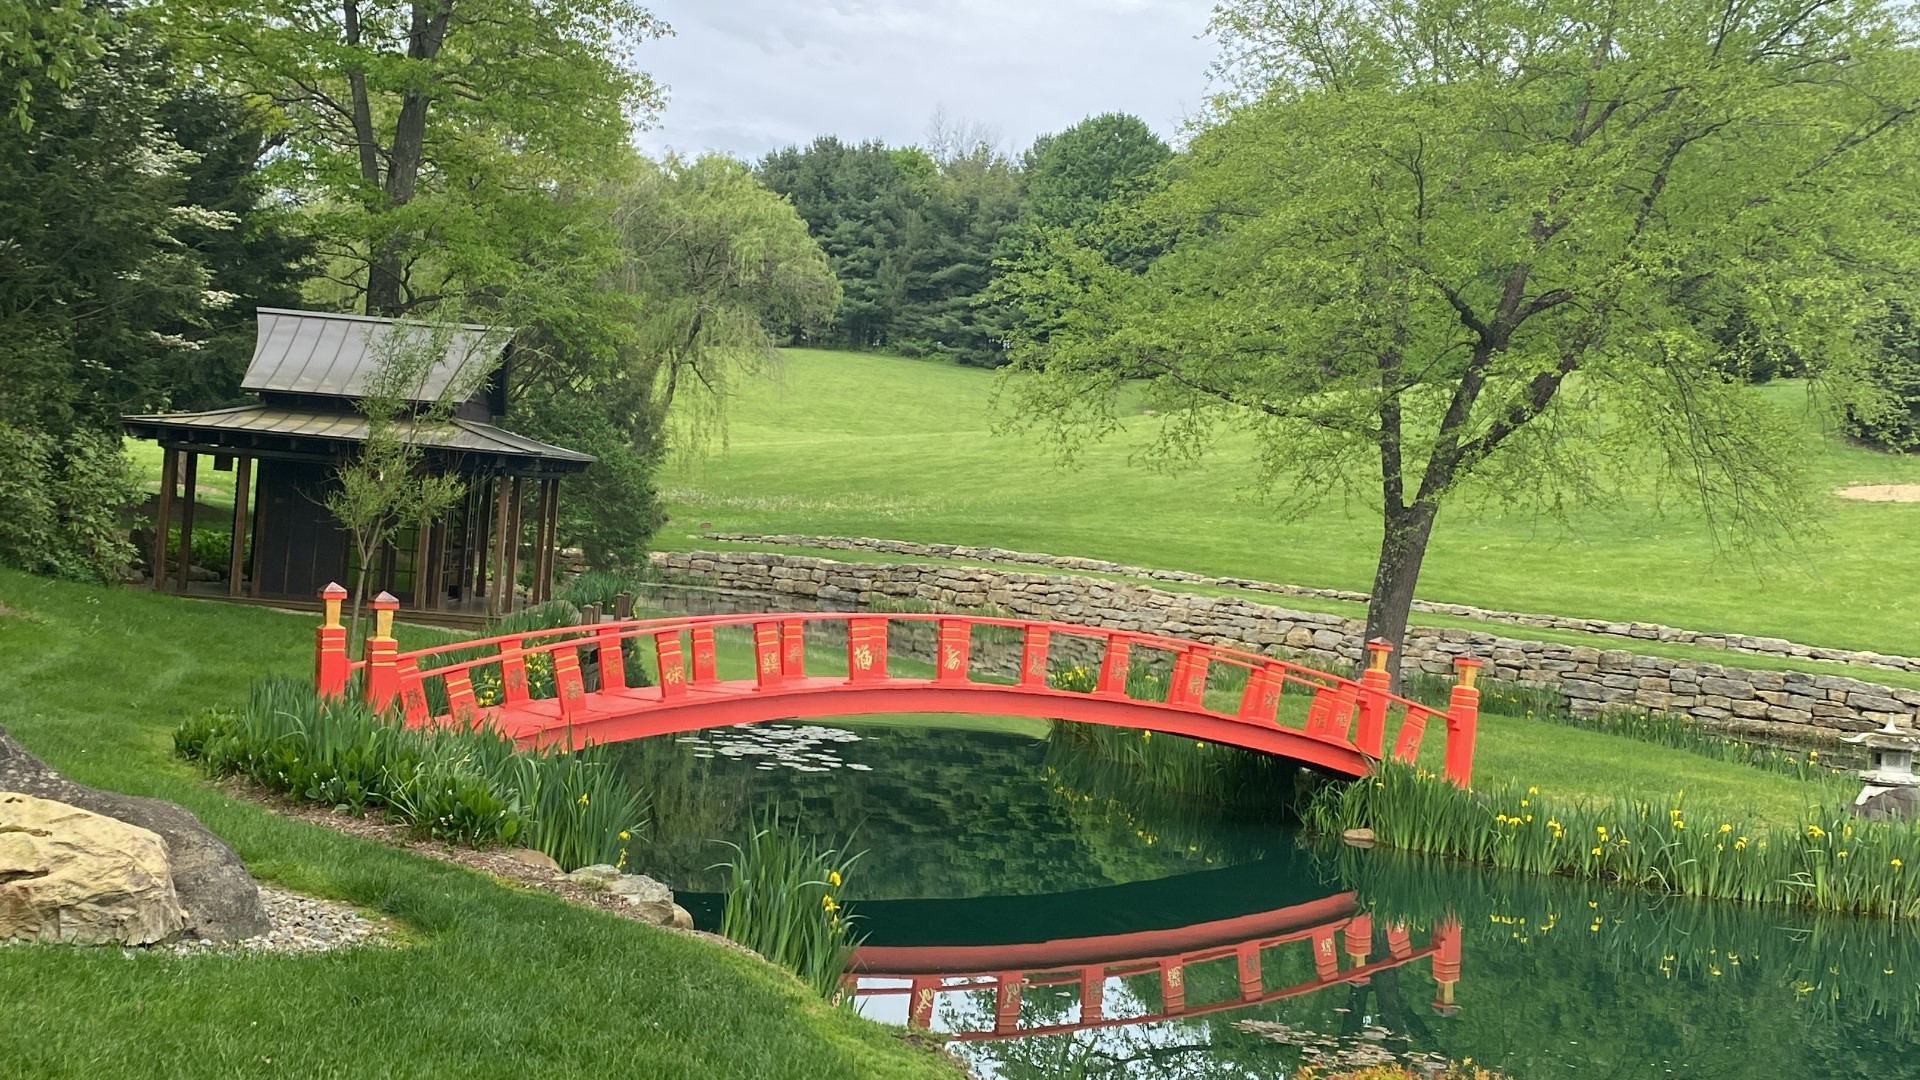 At Schnormeier Garndens, guests can experience a Japanese tea house, Chinese arch bridge, terra cotta soldiers from Xian, China and other artifacts from Asia.